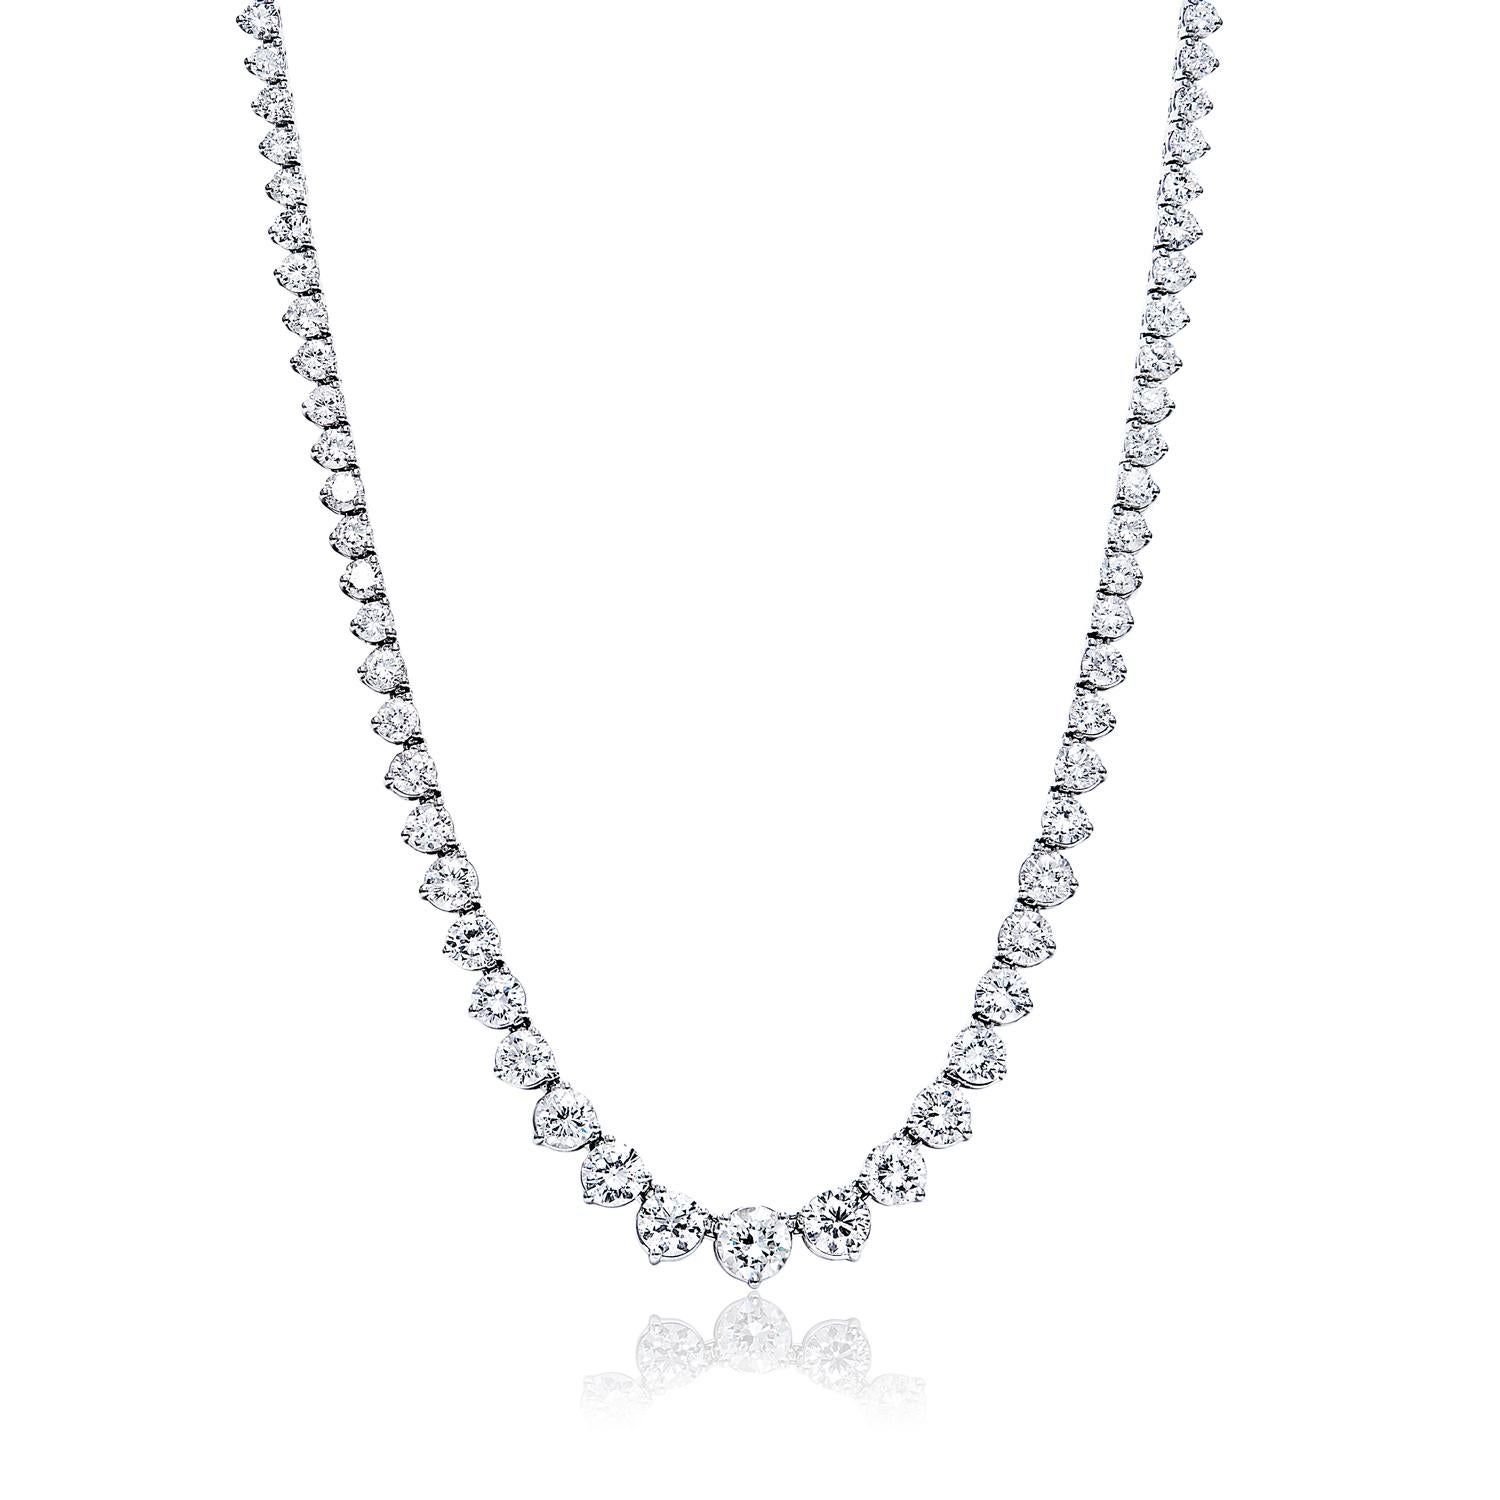 This gorgeous earth-mined diamond necklace is perfect for the special lady in your life. Featuring a stunning 10.63 carat round brilliant cut diamond, this necklace is set in 14 karat white gold and comes with a matching chain. The perfect way to